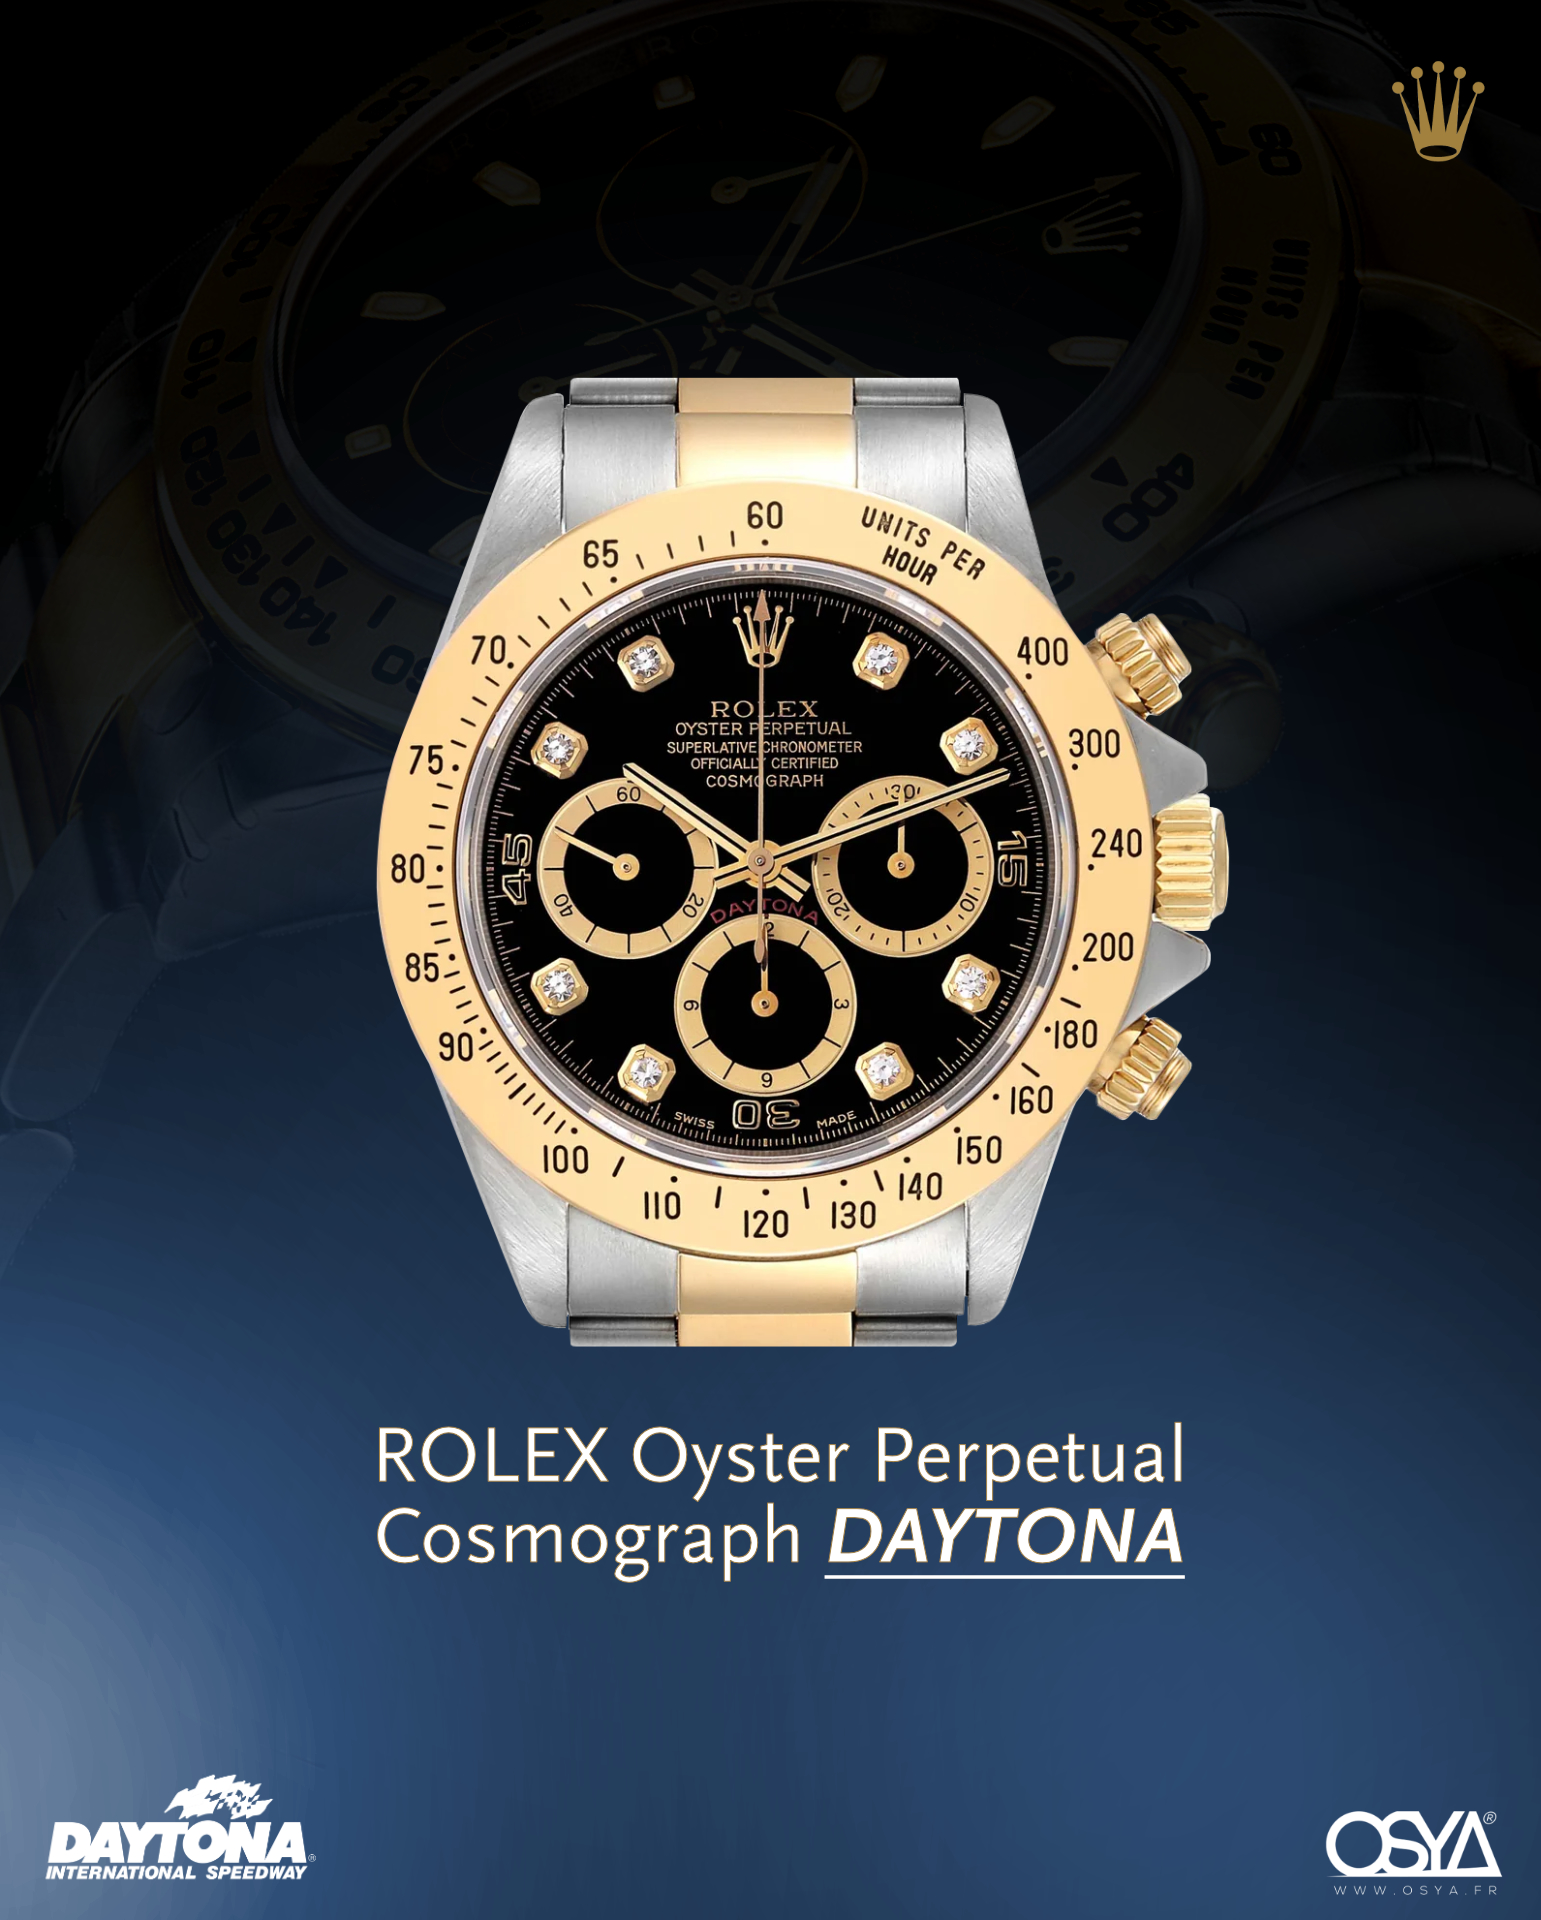 ROLEX Oyster Perpetual Cosmograph